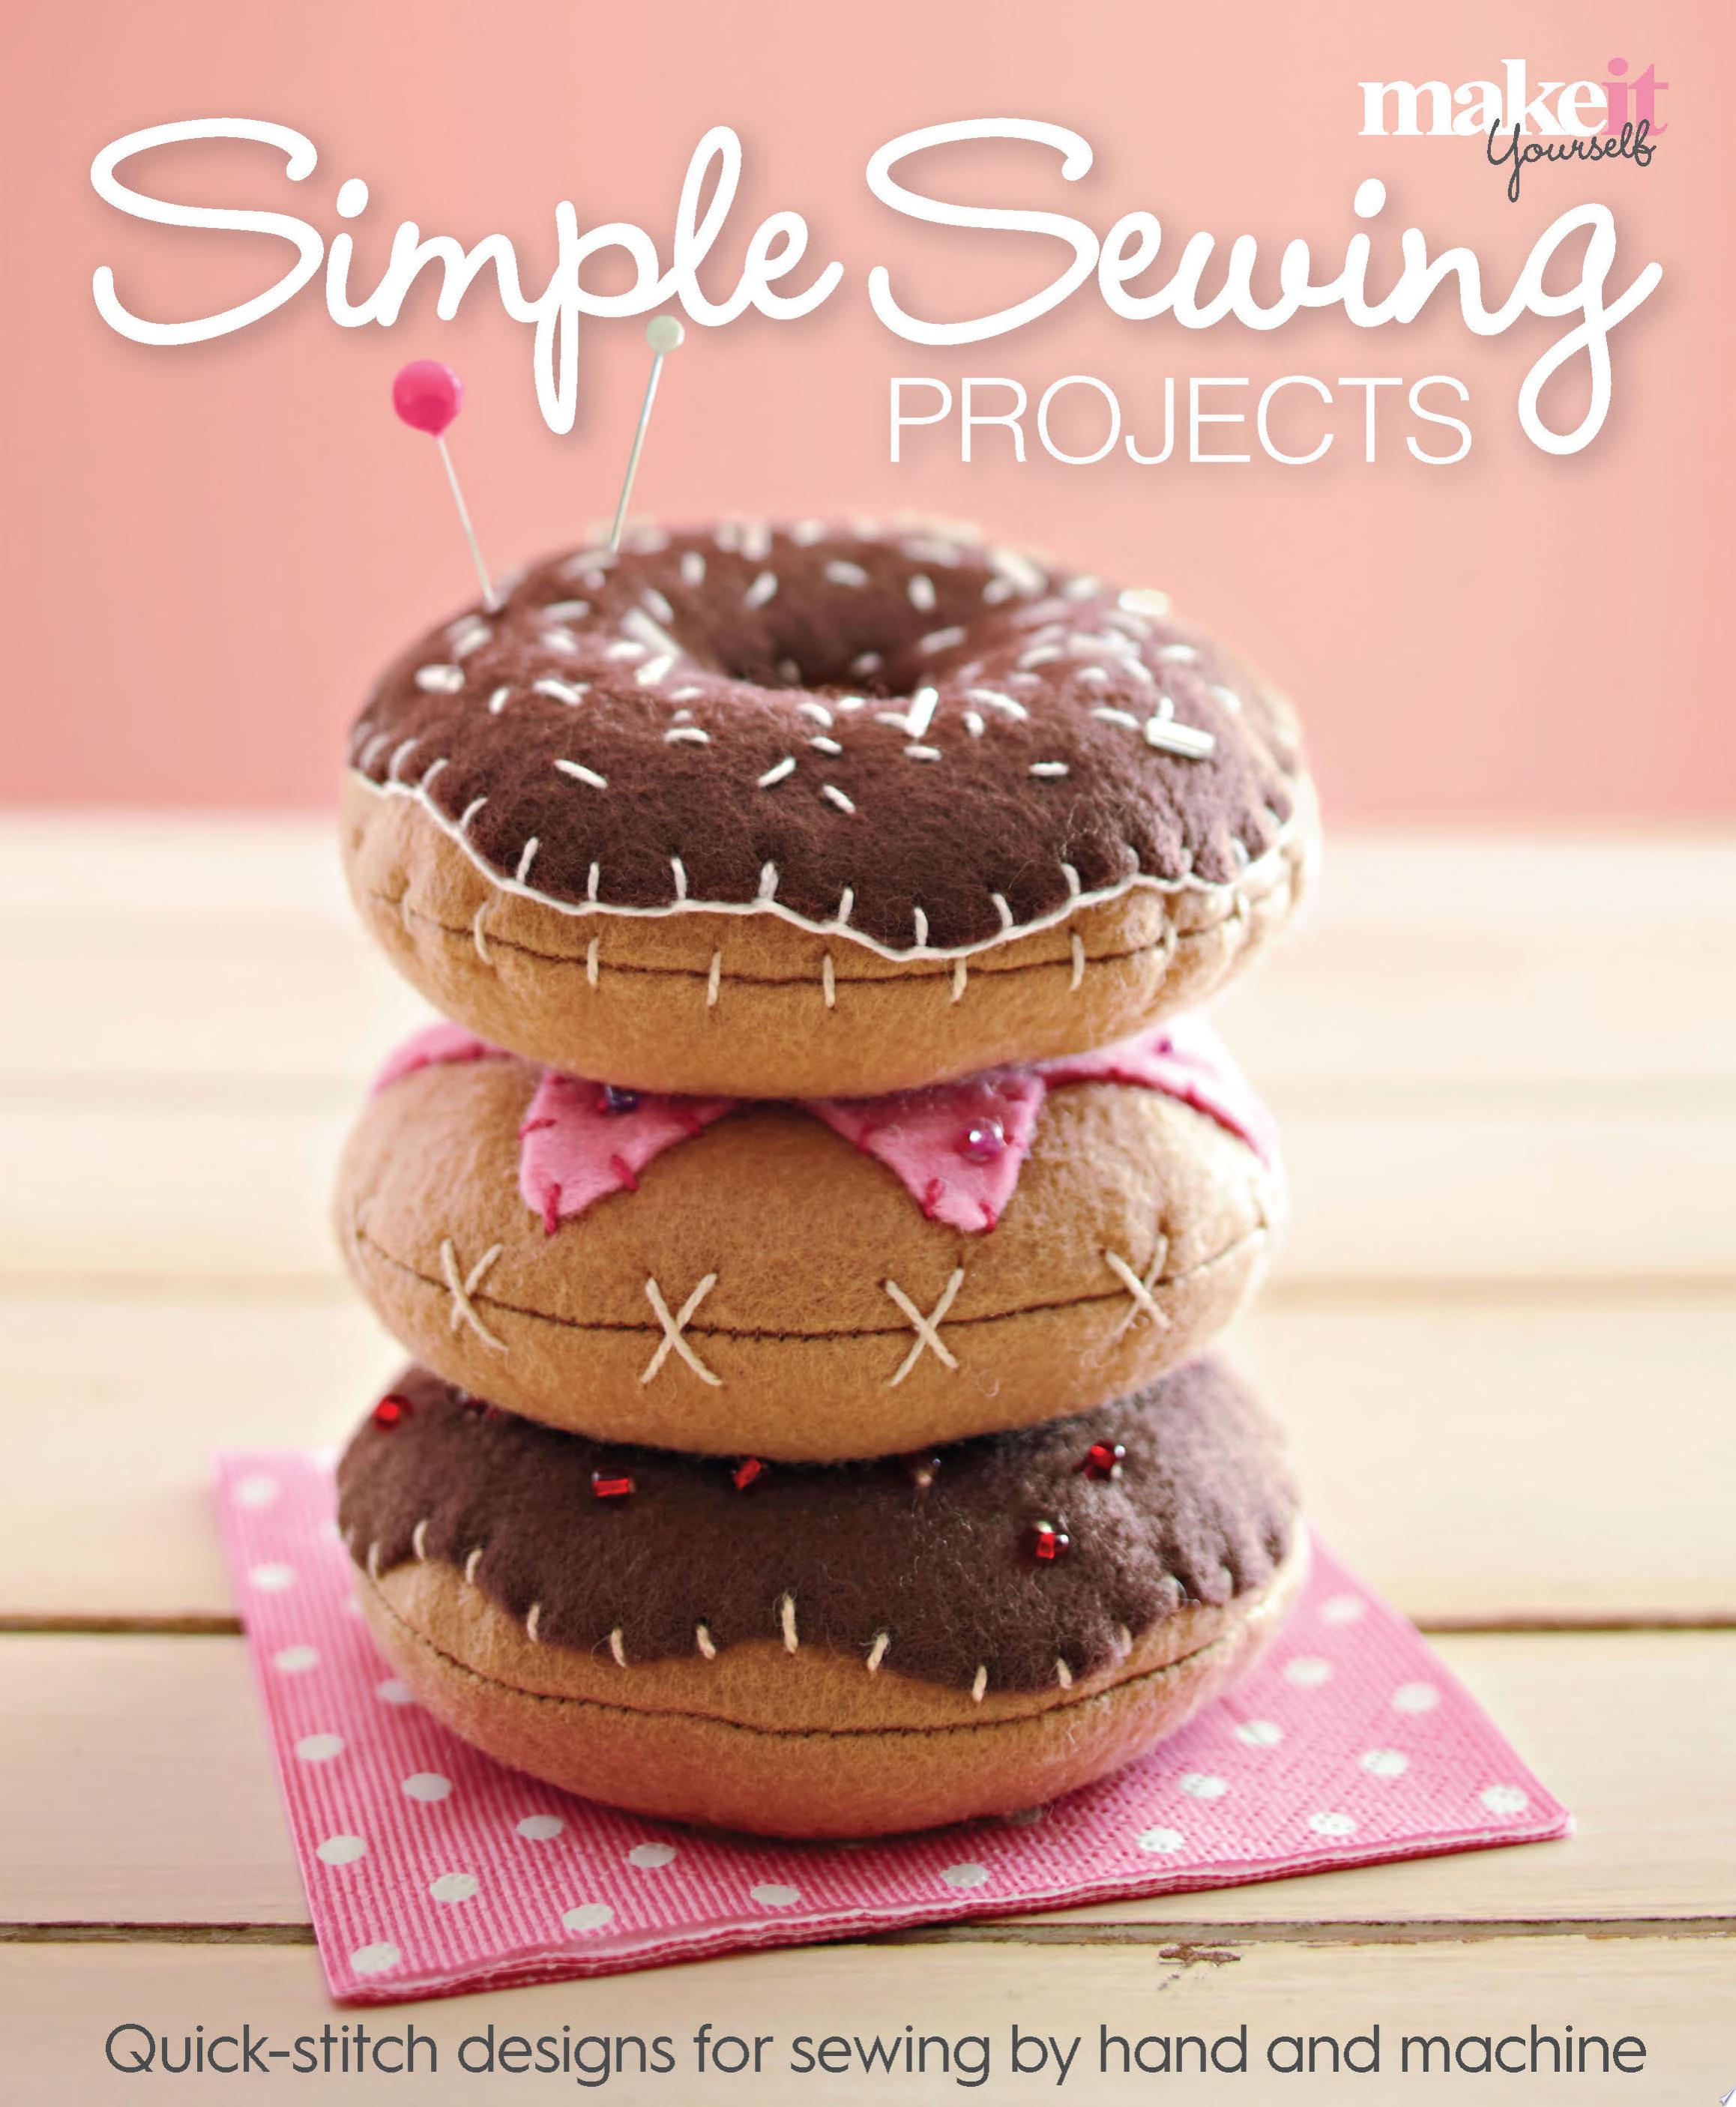 Image for "Simple Sewing Projects"